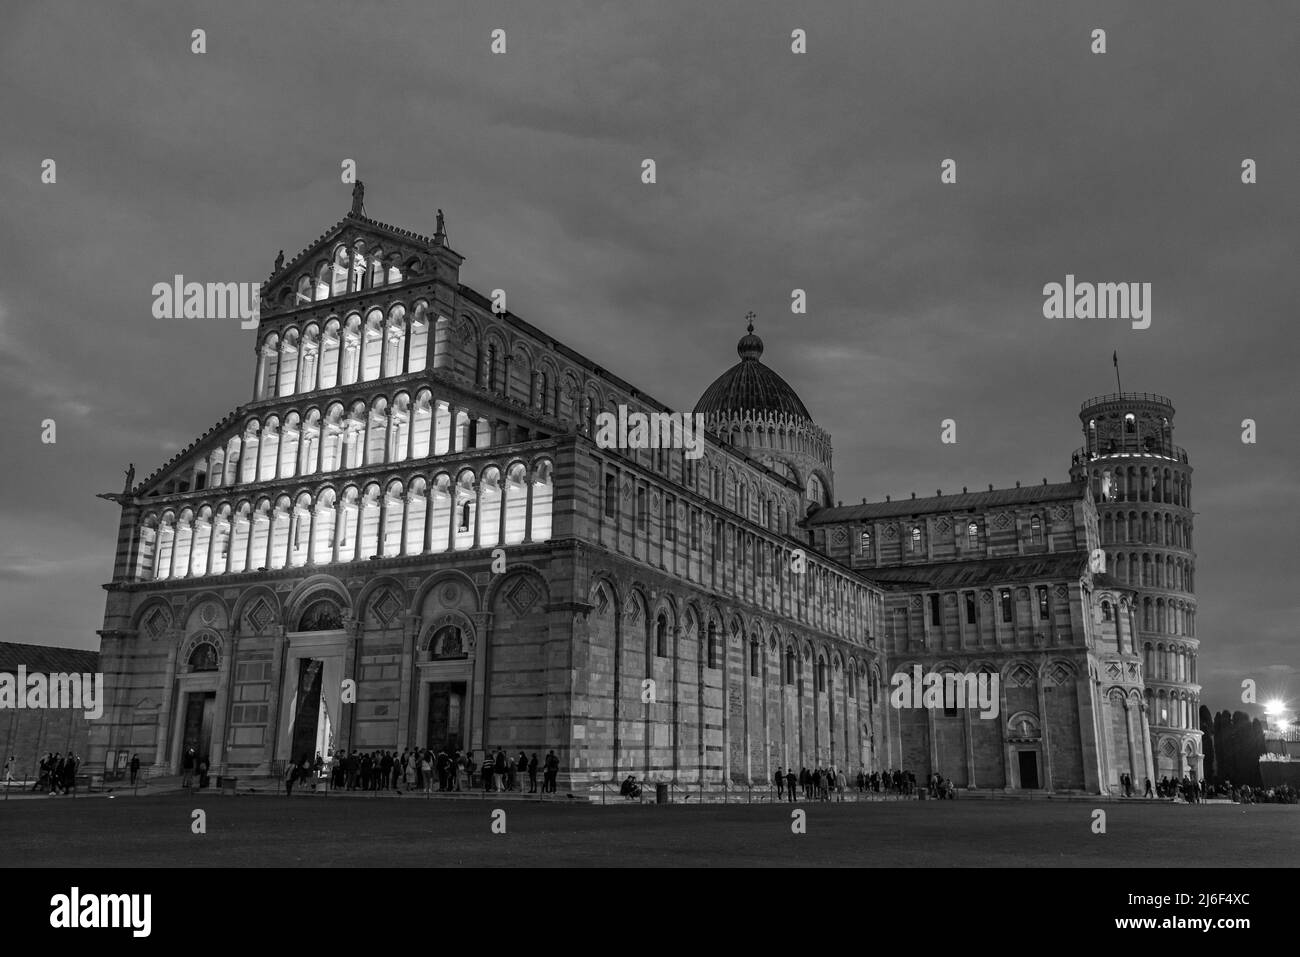 Center of nave Black and White Stock Photos & Images - Alamy